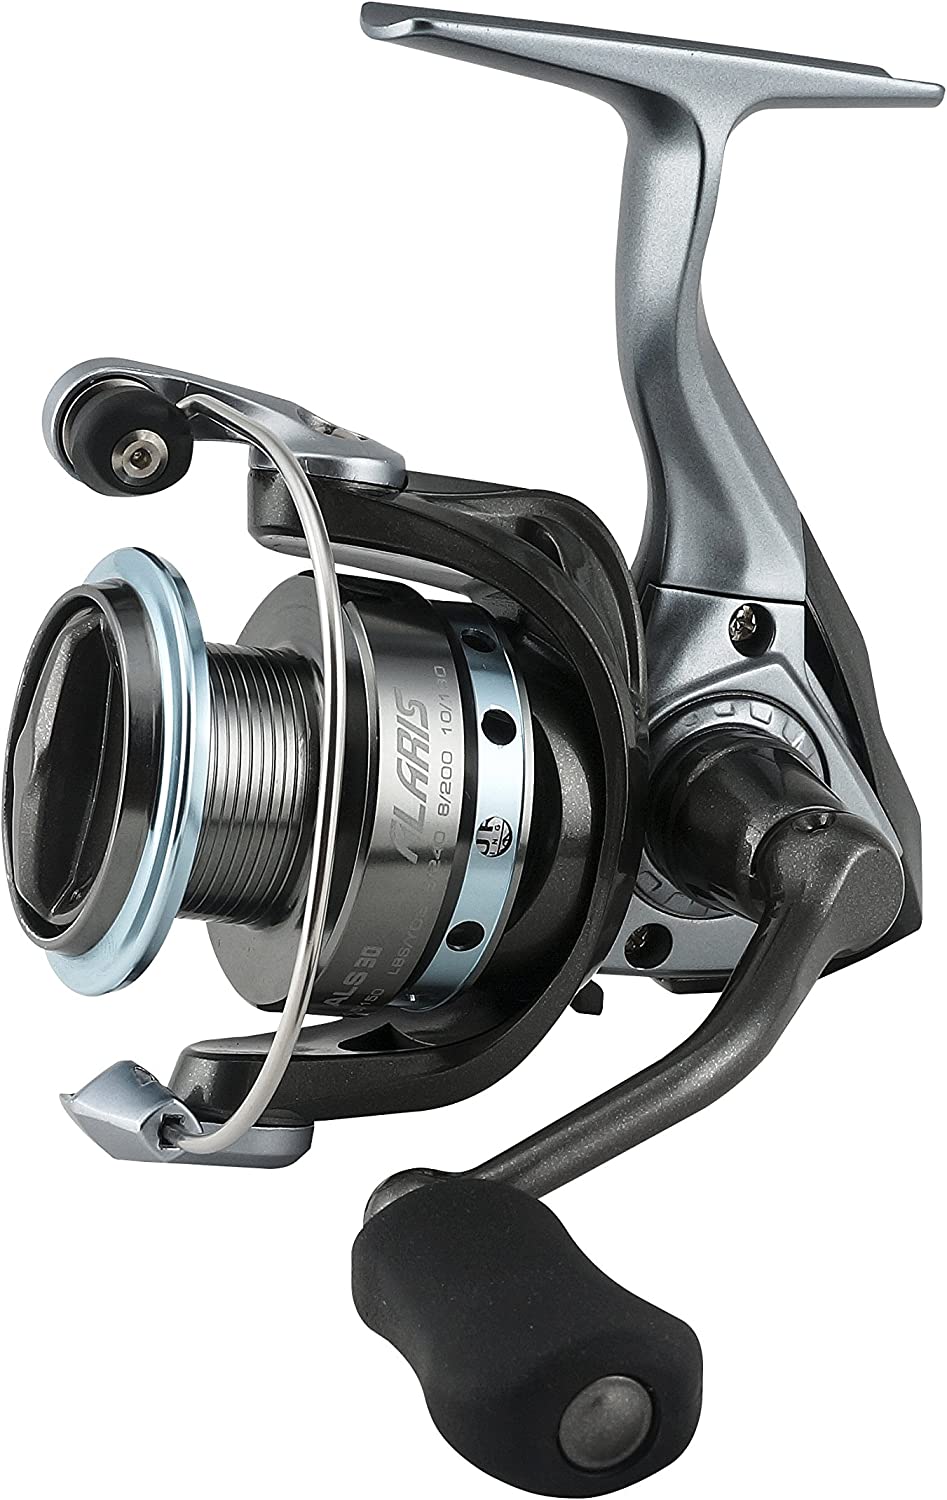 17kg Offshore Baitcasting Okuma Reels With Max Drag Of 7.1:1, Metal Body,  Slow Pitch Jigging, Trolling Wheel, And Saltwater Fishing Tackle 220514  From You09, $84.97